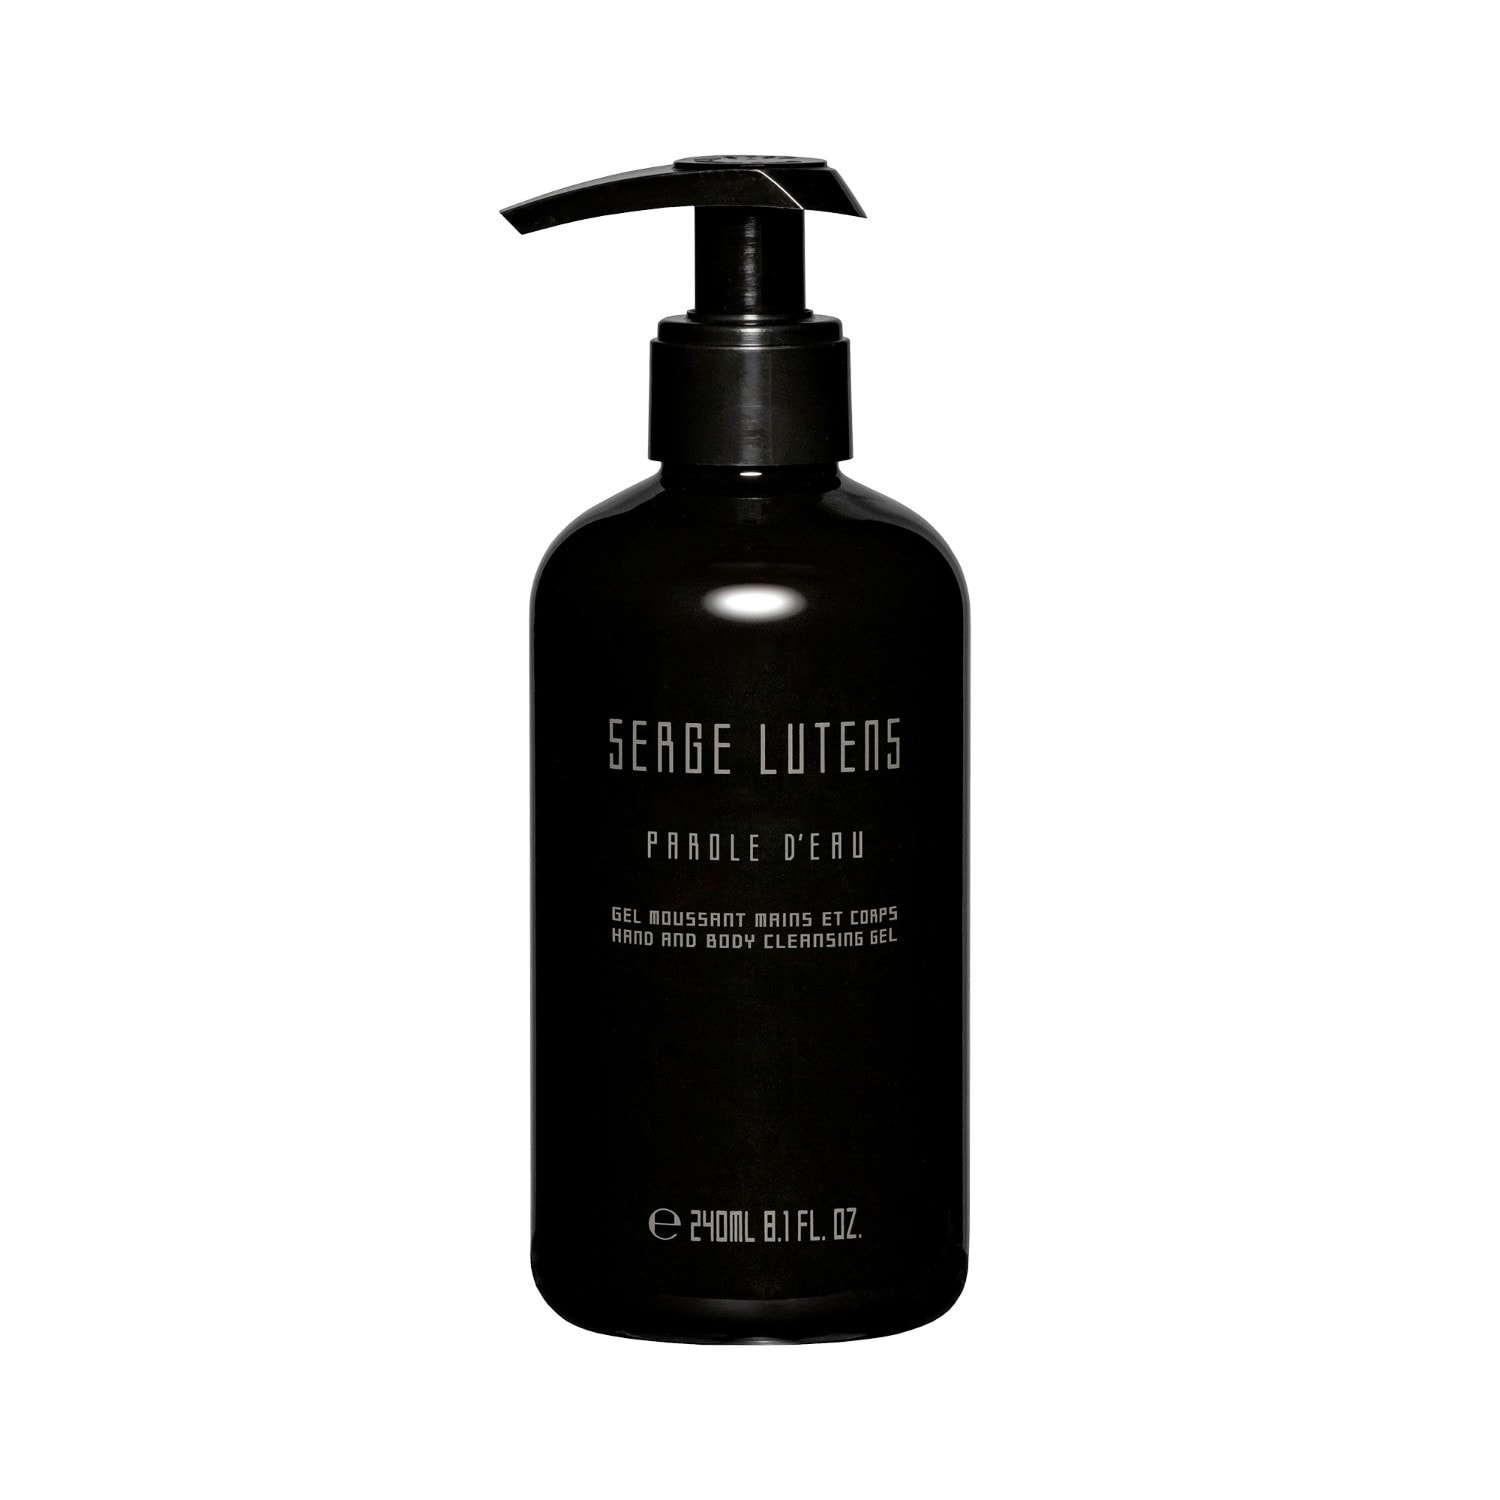 Serge Lutens Matin Lutens Parole deau Hand and Body Cleansing Gel